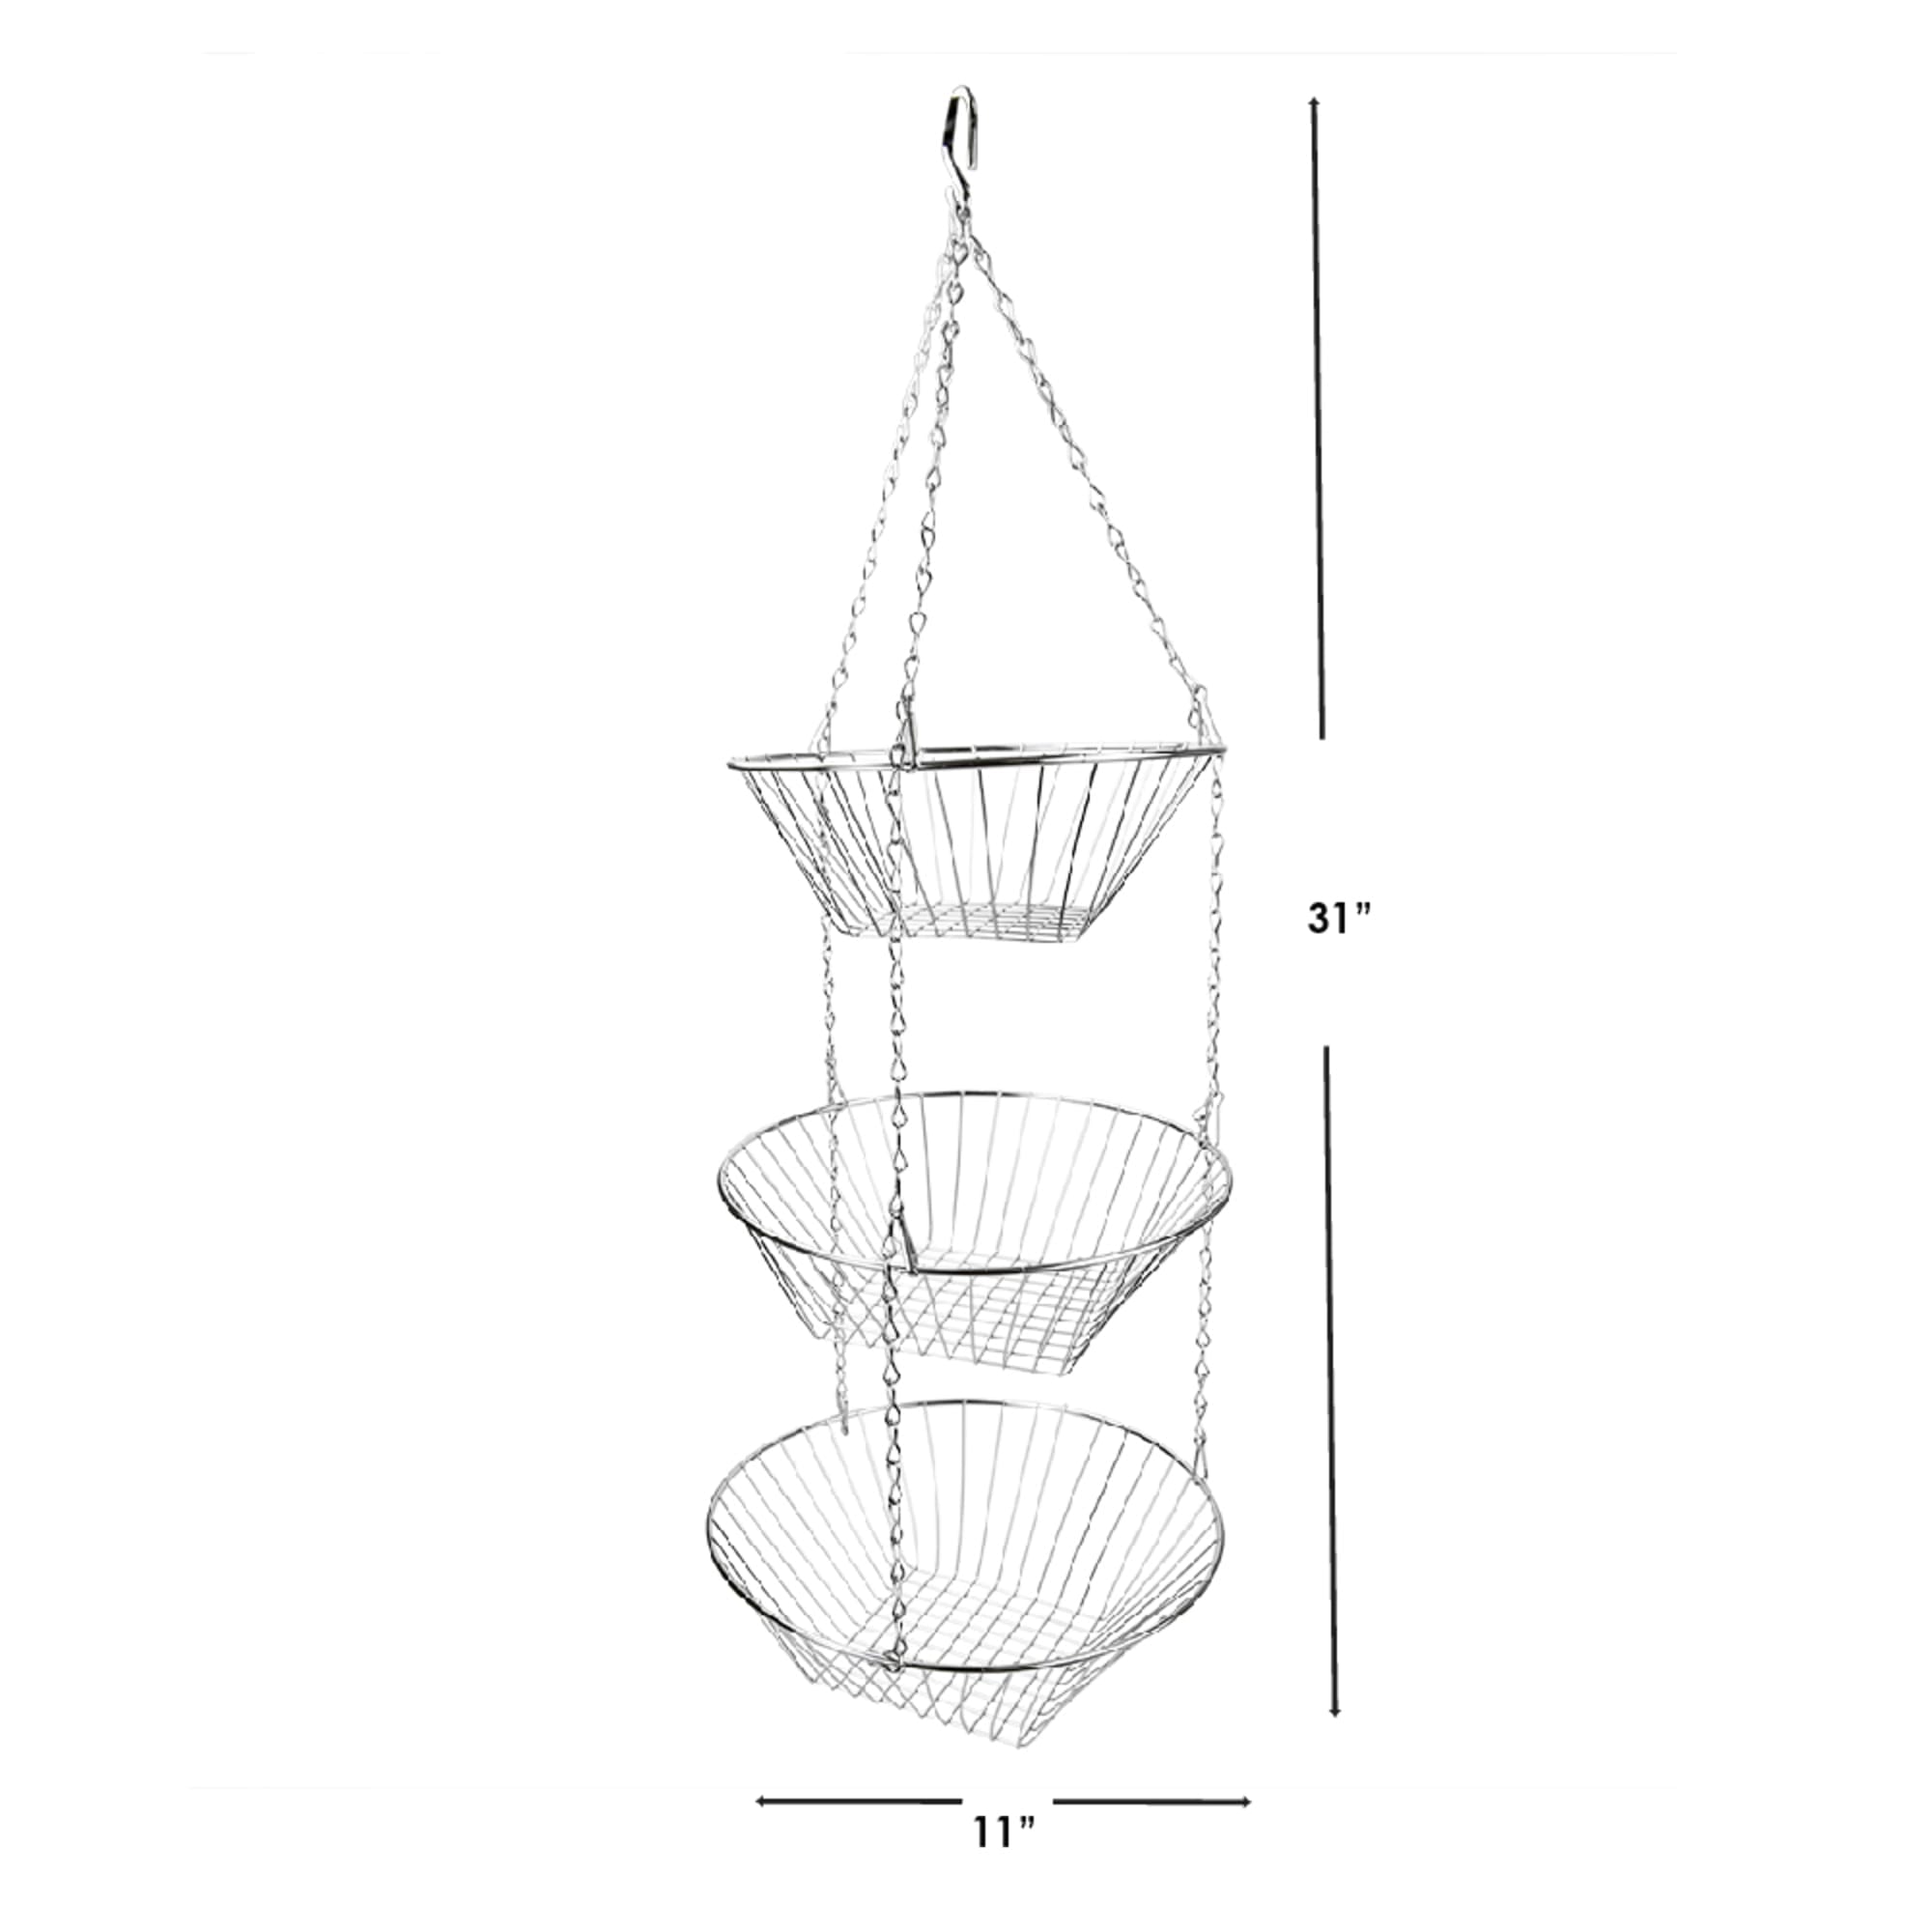 Home Basics  3 Tier Wire Hanging Round Fruit Basket, Chrome $8.00 EACH, CASE PACK OF 12